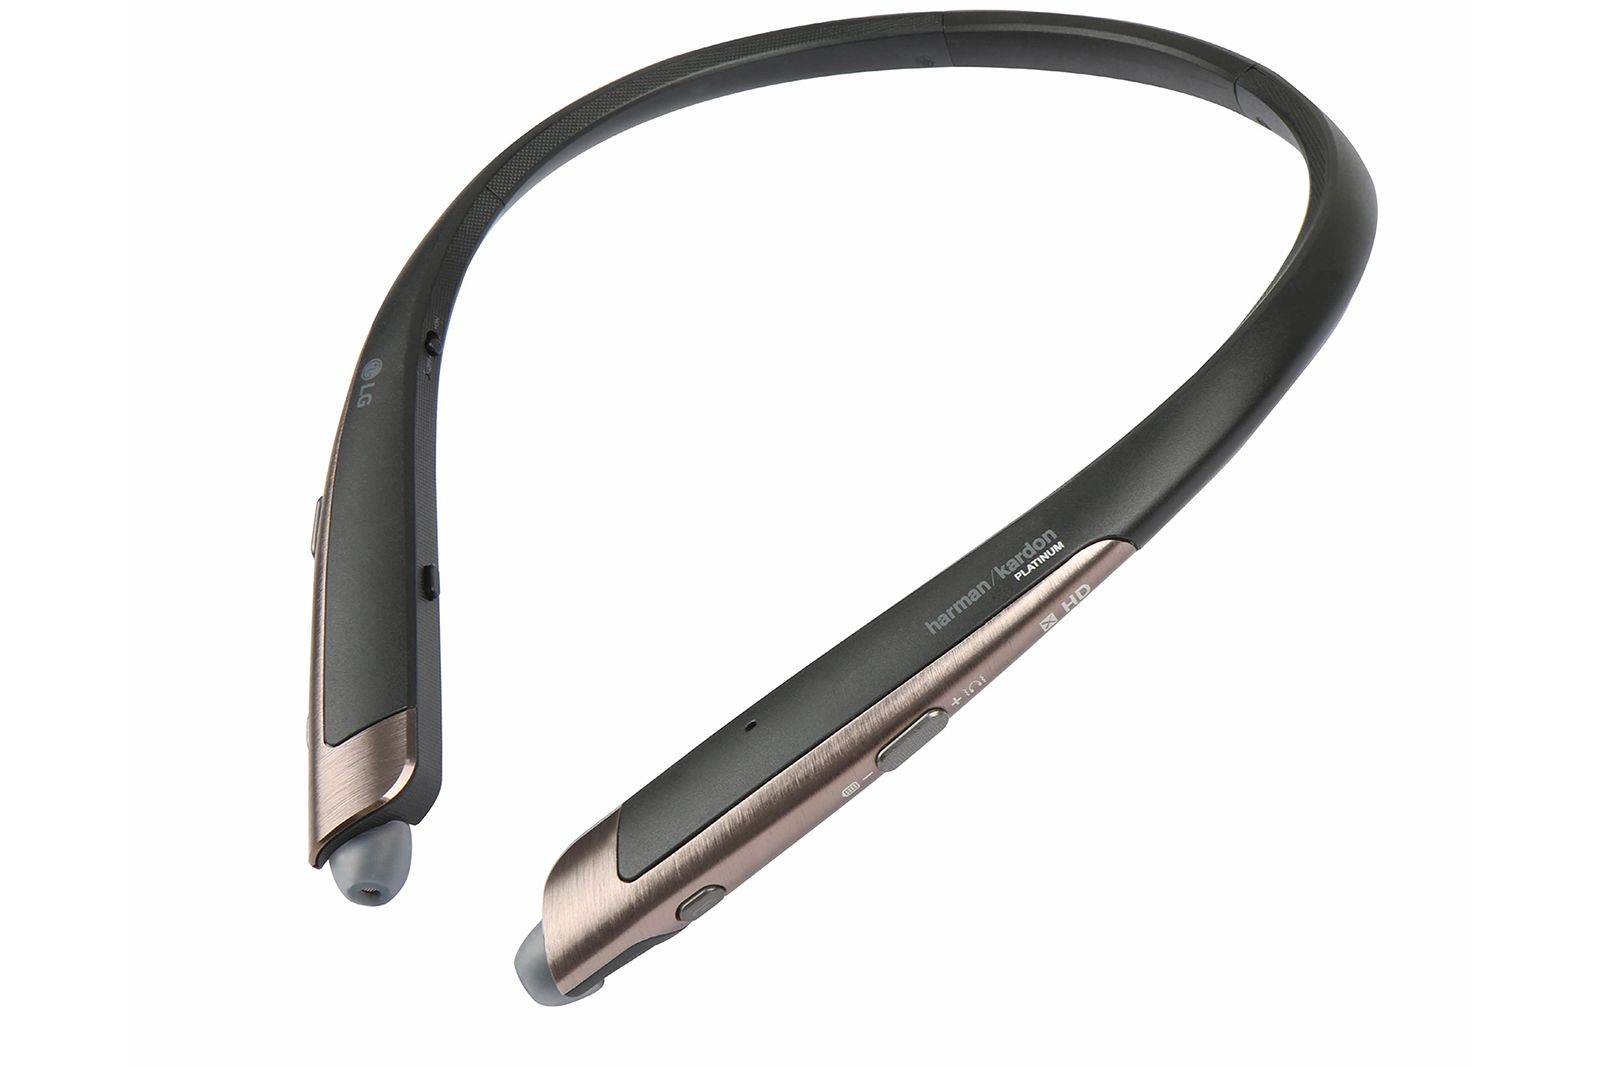 lg tone platinum wireless in ears look bonkers but have high end aspirations image 1